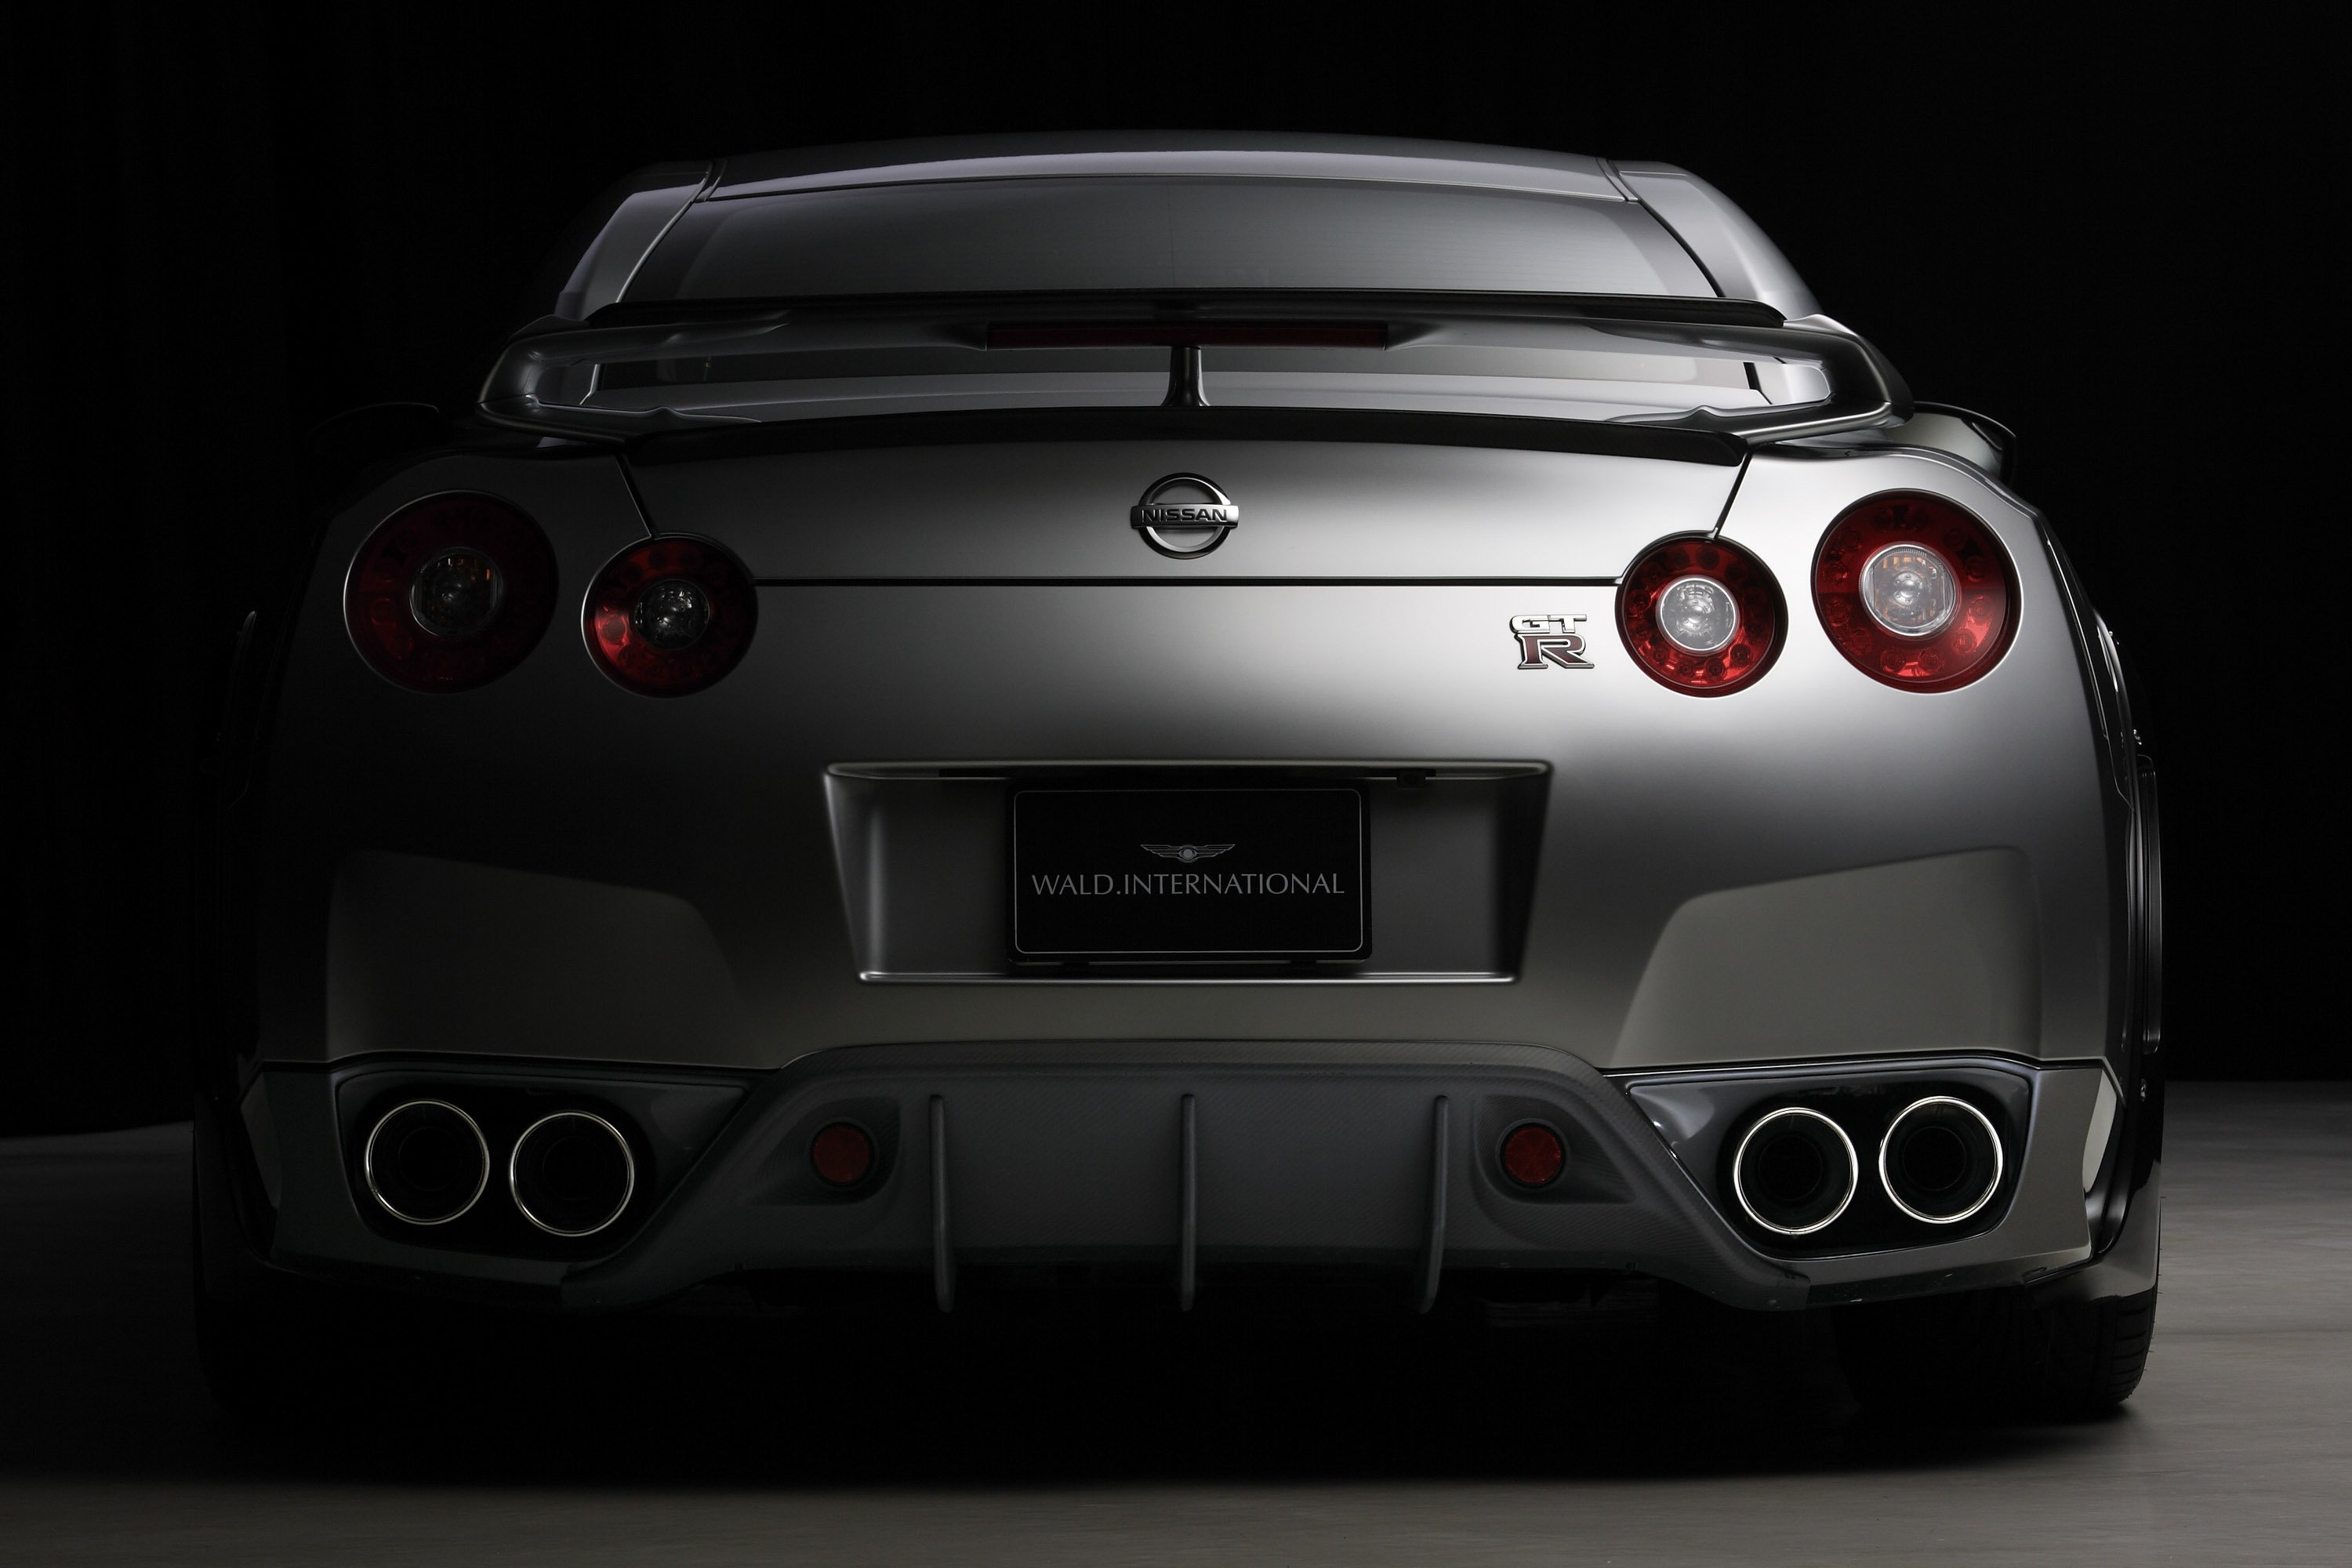 Gt R Nismo Nissan R35 Tuning Supercar Coupe Japan Gris Grey Wallpapers Hd Desktop And Mobile Backgrounds